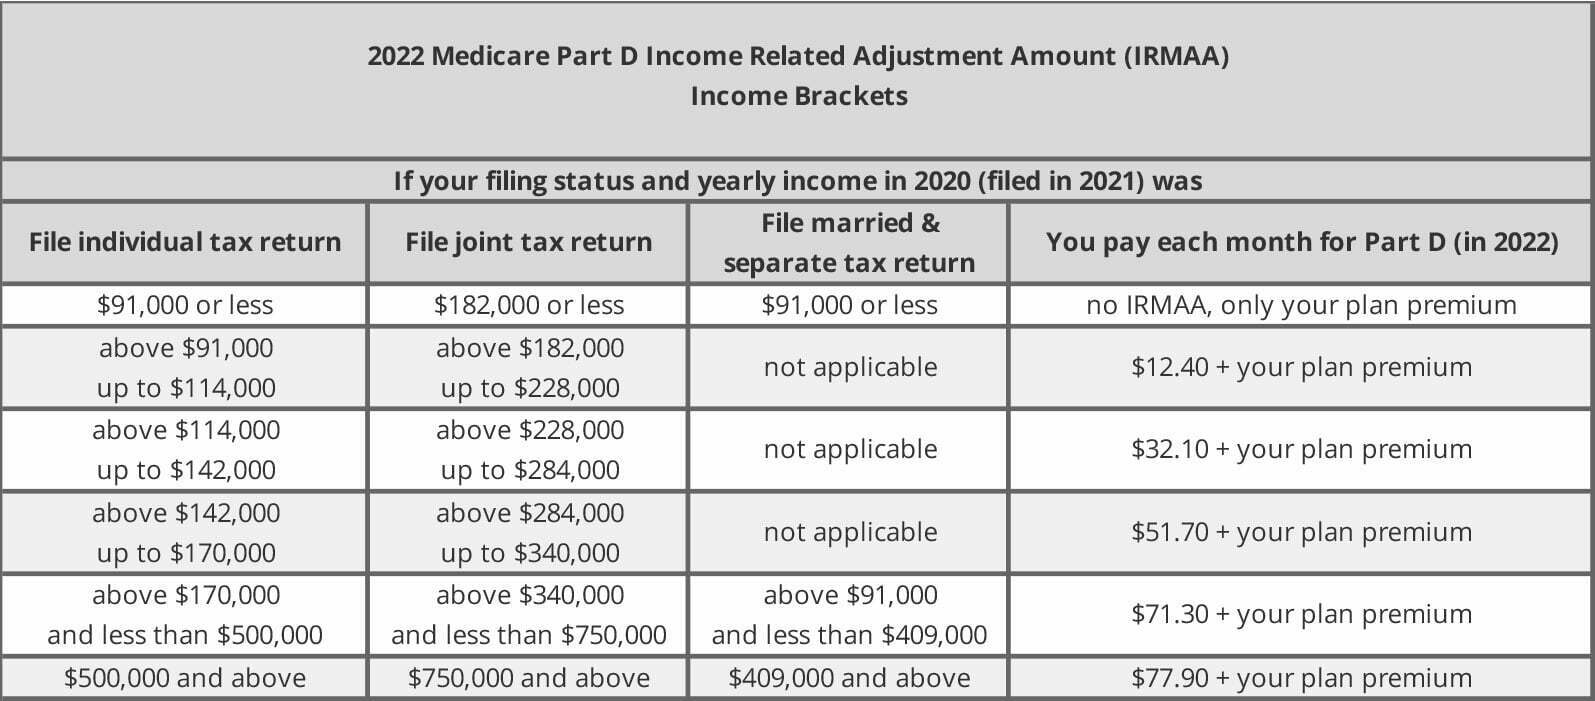 What Is the 2022 Medicare Part B Premium and What Are the 2022 IRMAA